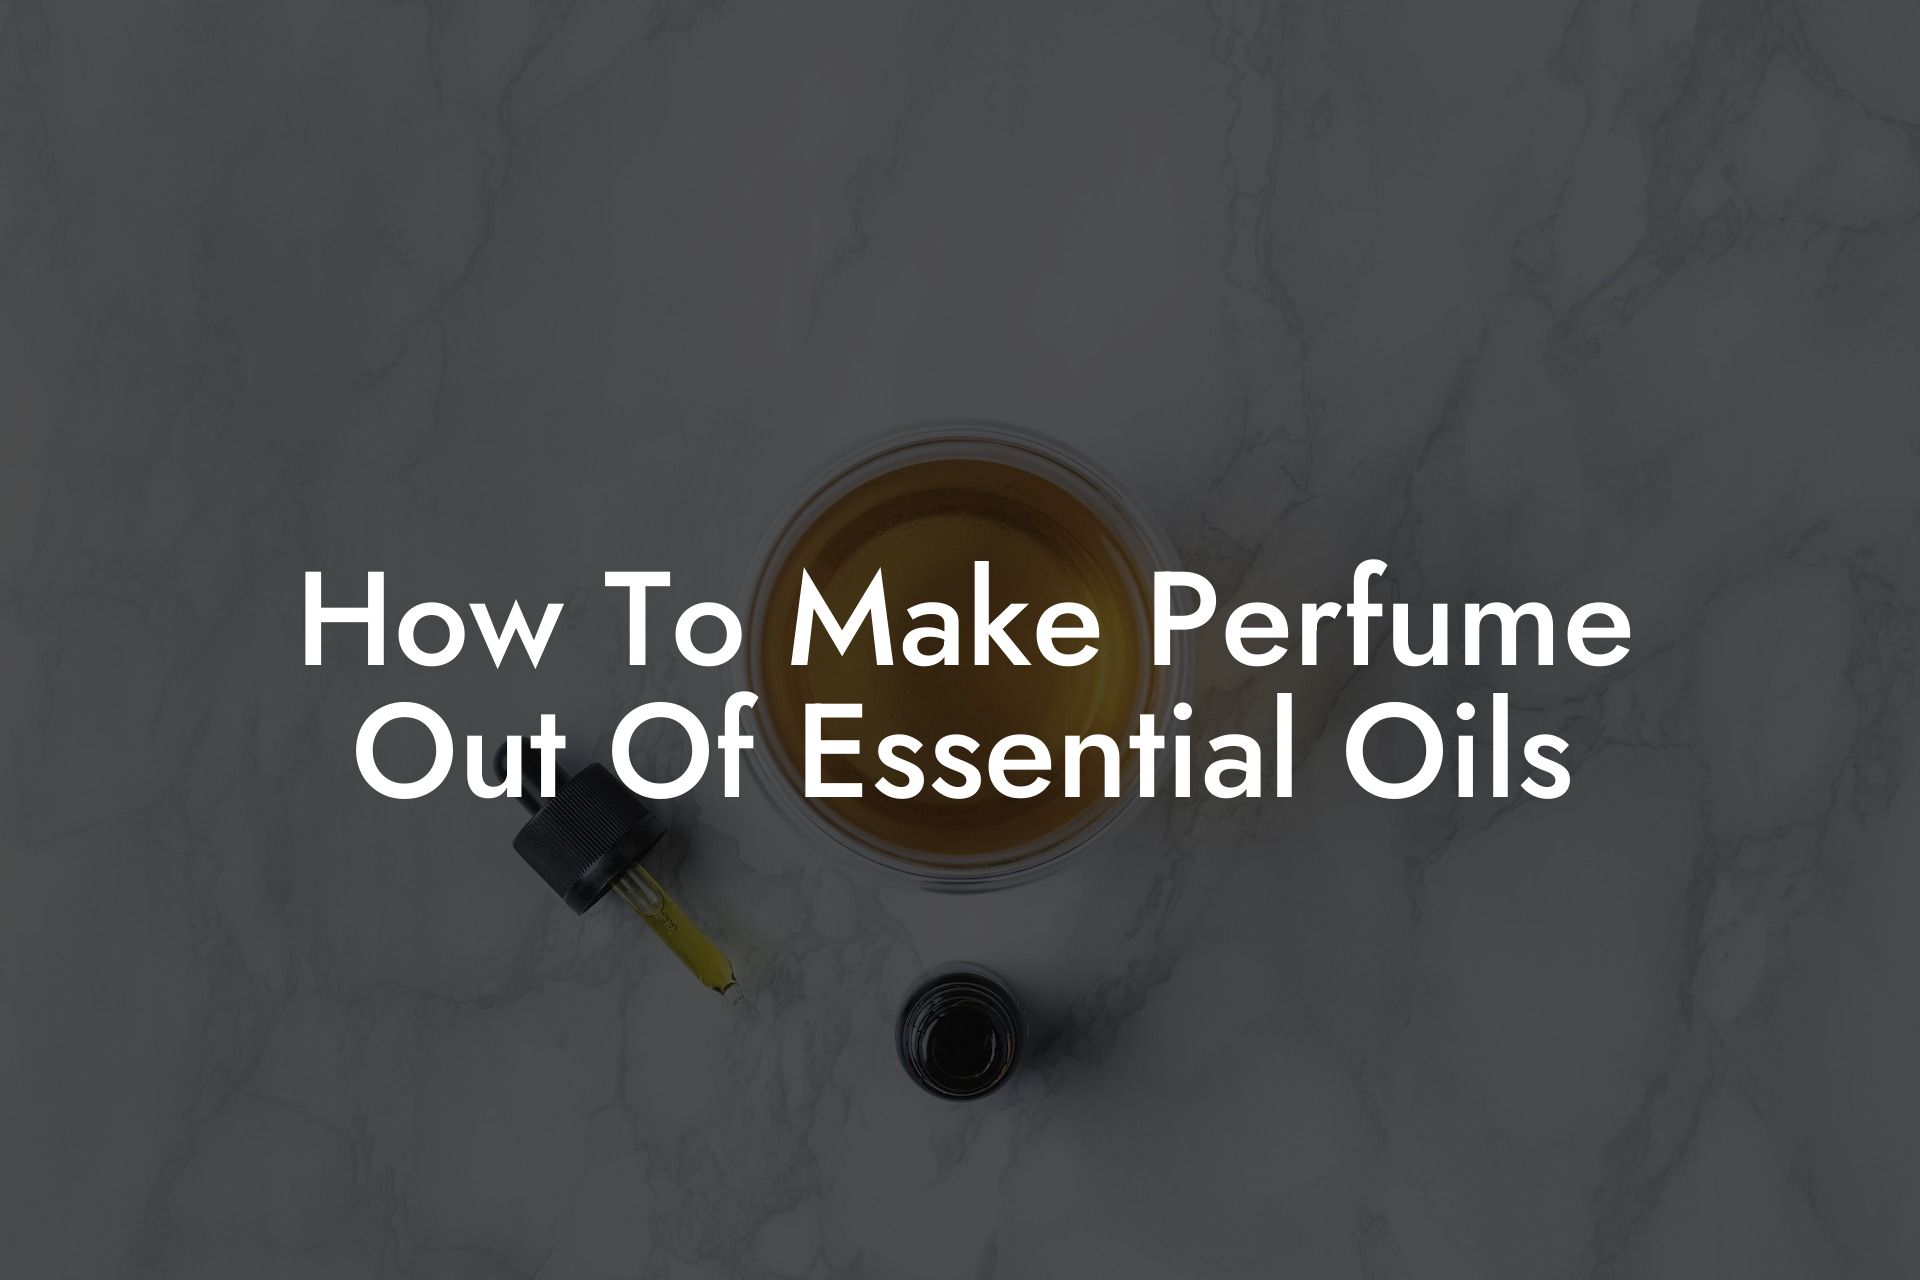 How To Make Perfume Out Of Essential Oils